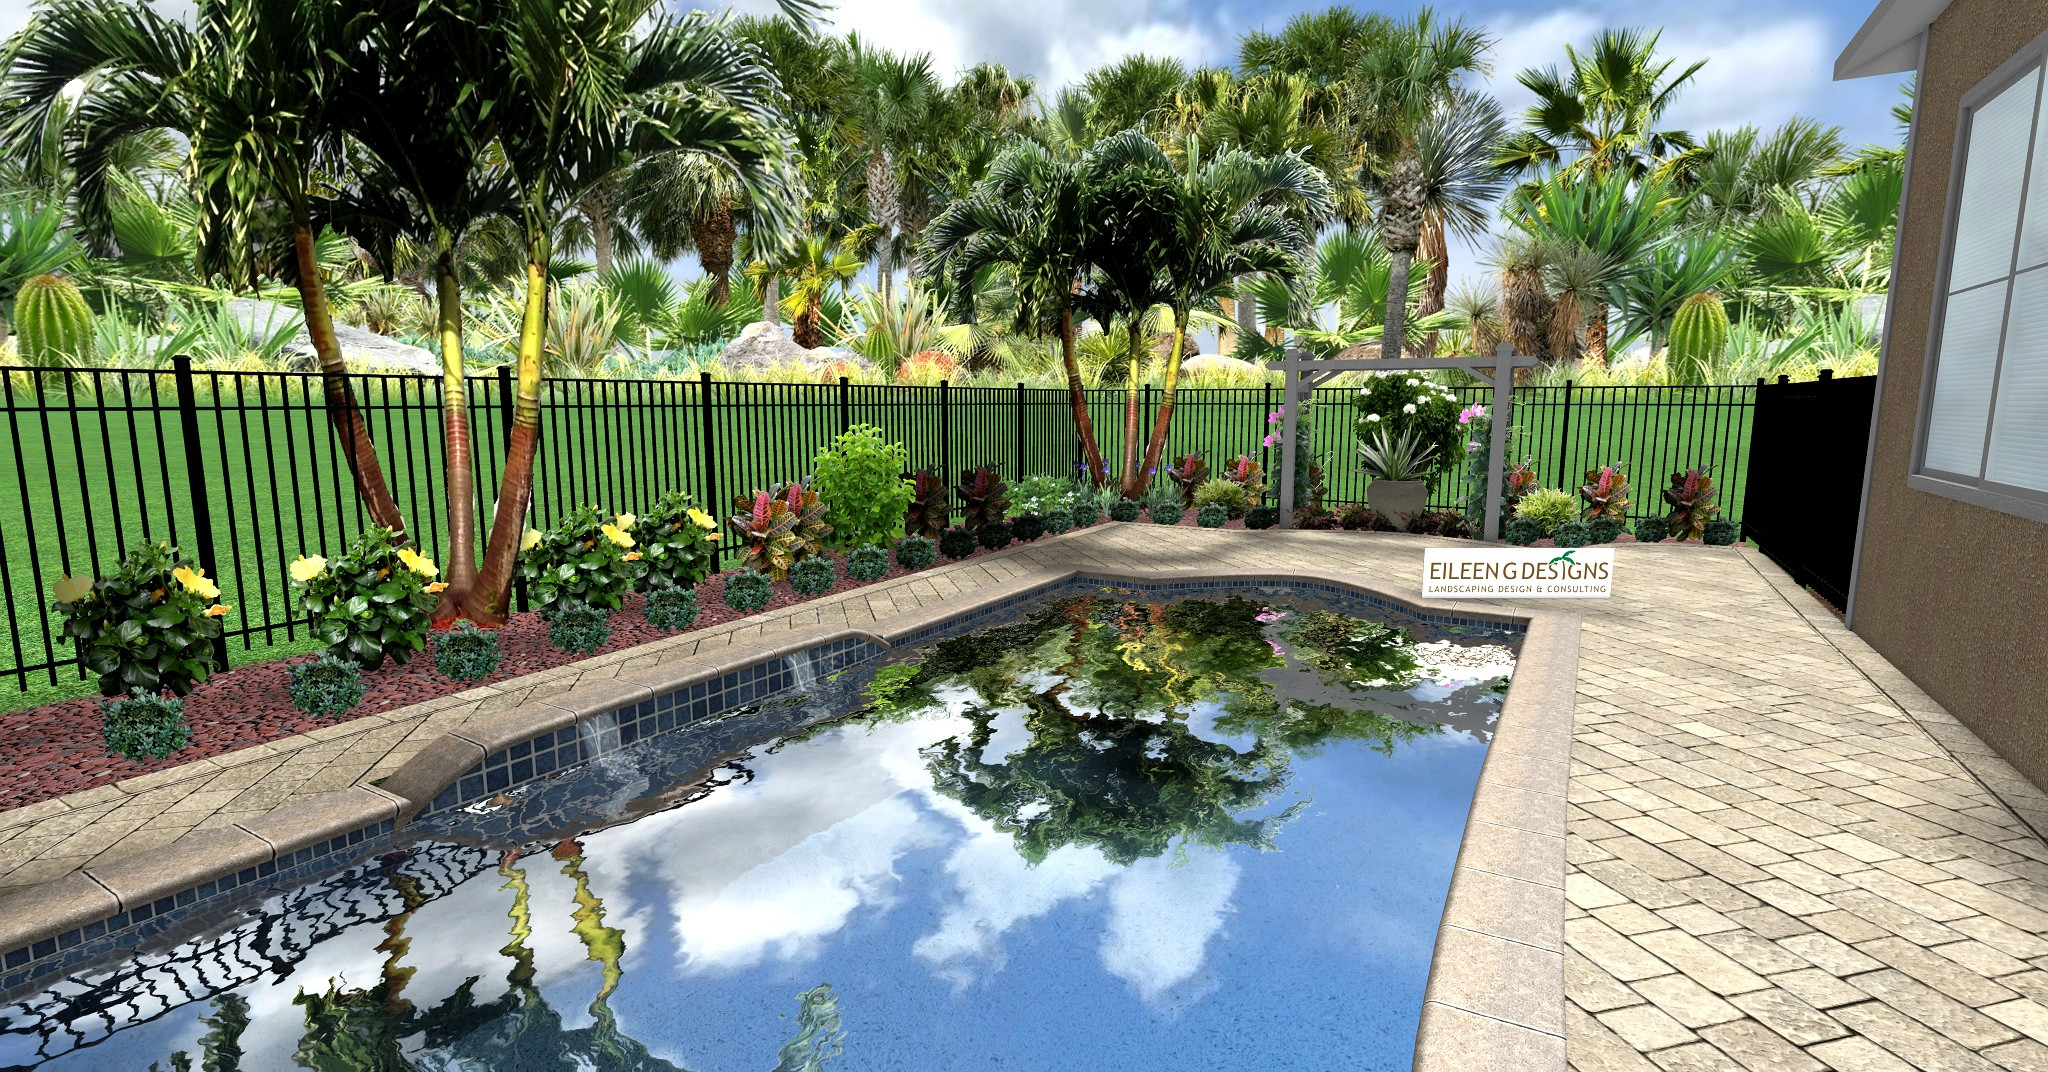 Backyard Pool Landscaping Ideas
 TROPICAL LANDSCAPING AND PAVER DECK FOR SMALL POOL AREA